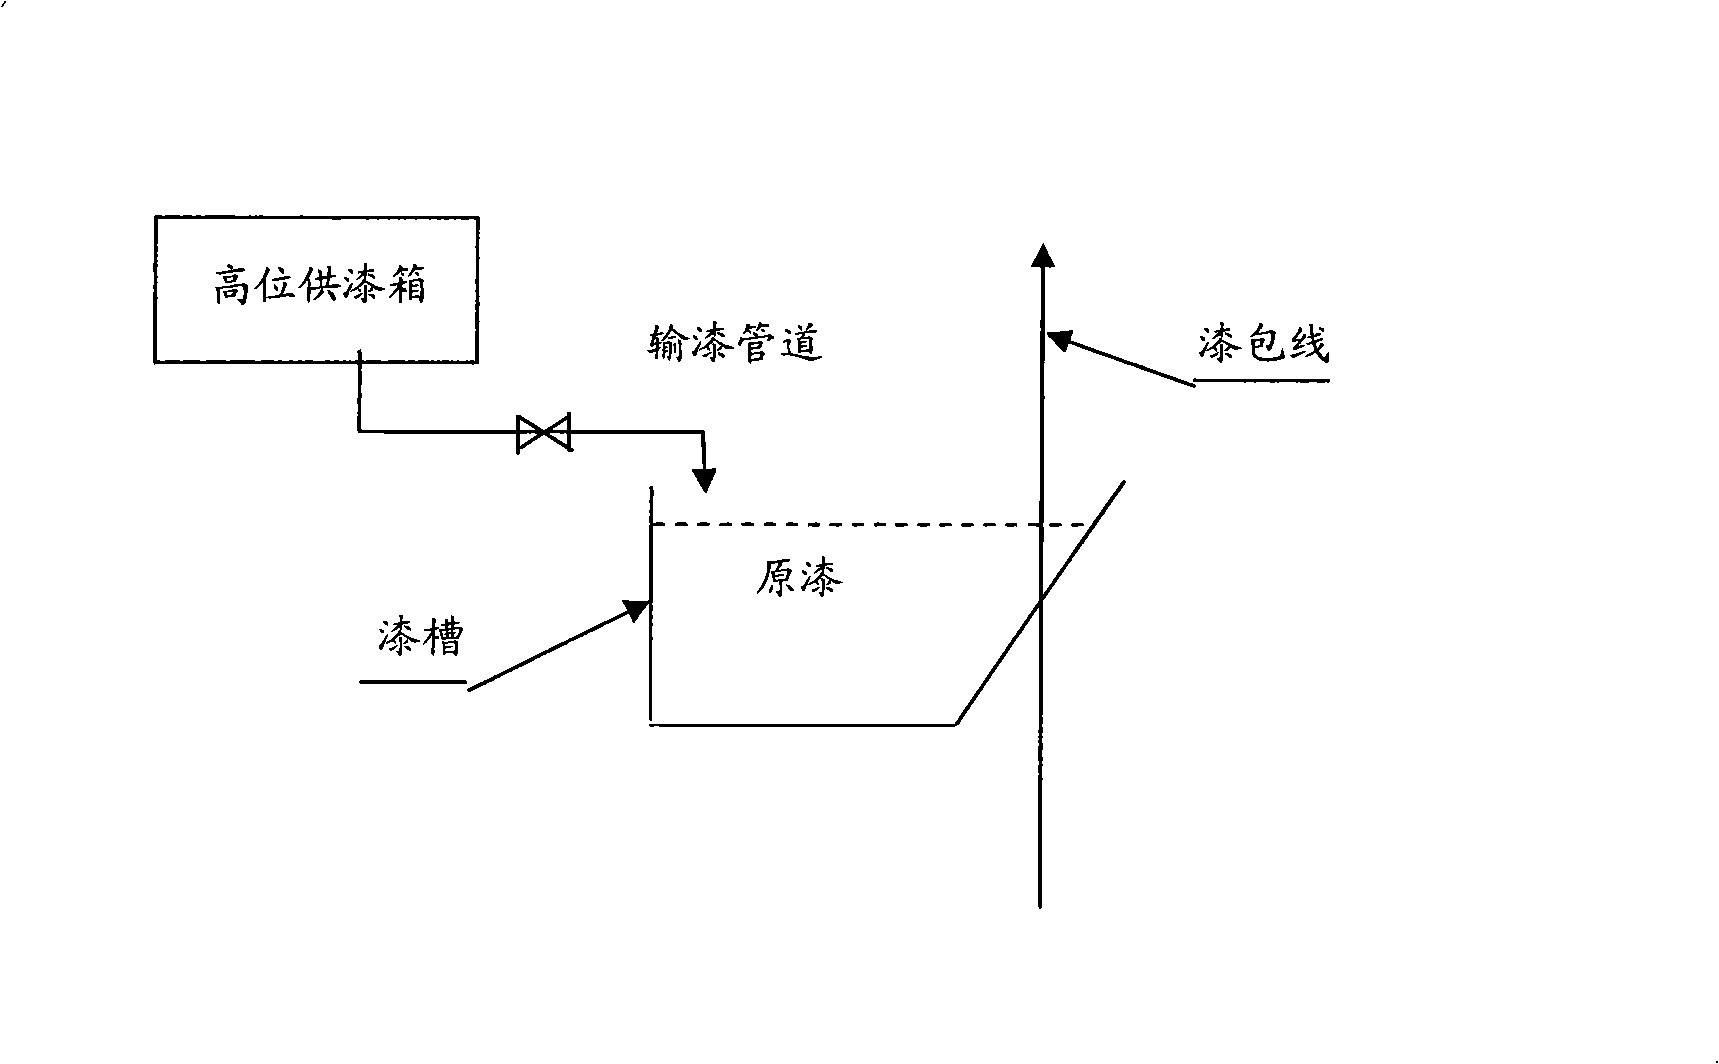 Method and apparatus for cleanness continuously supplying paint to varnished wire painting groove